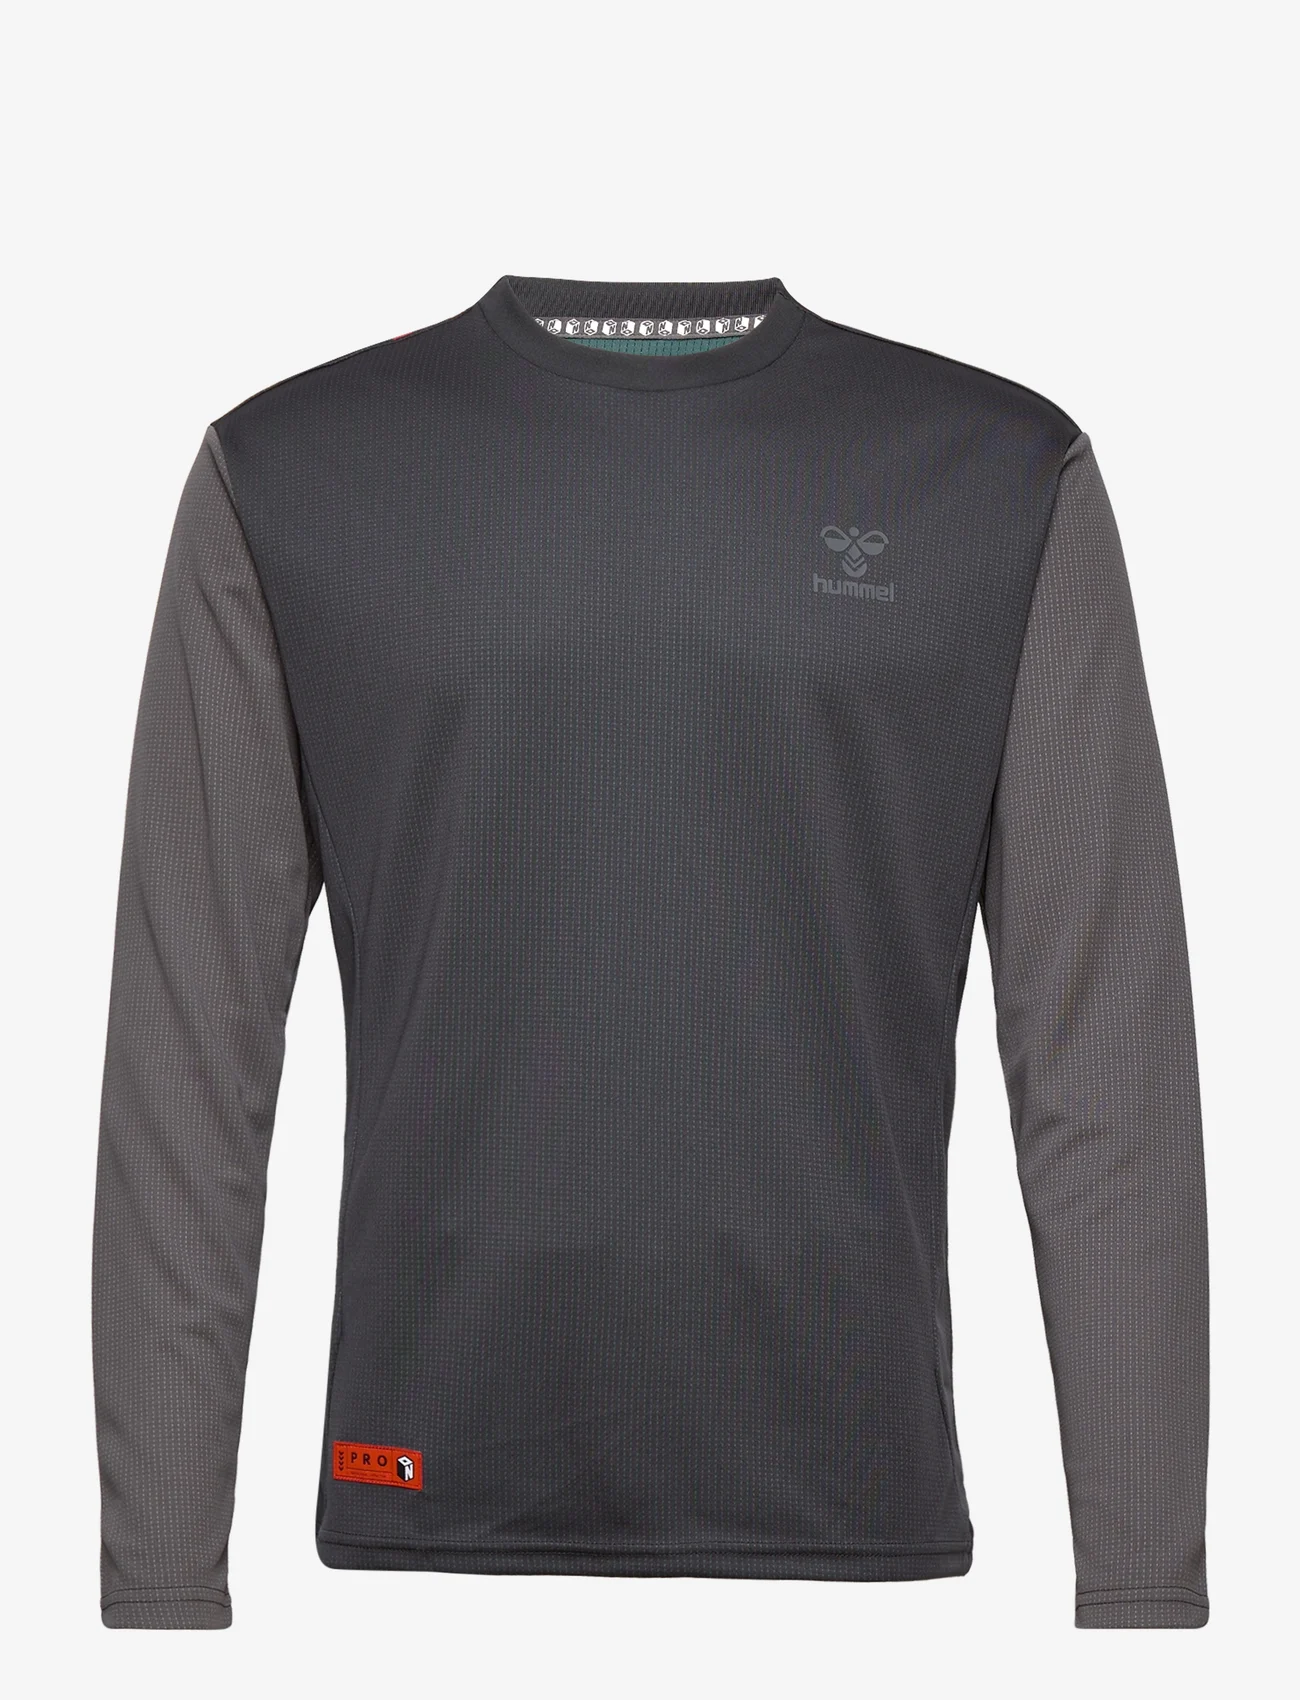 Hummel - hmlPRO GRID GAME JERSEY L/S - pitkähihaiset t-paidat - forged iron/quiet shade - 0